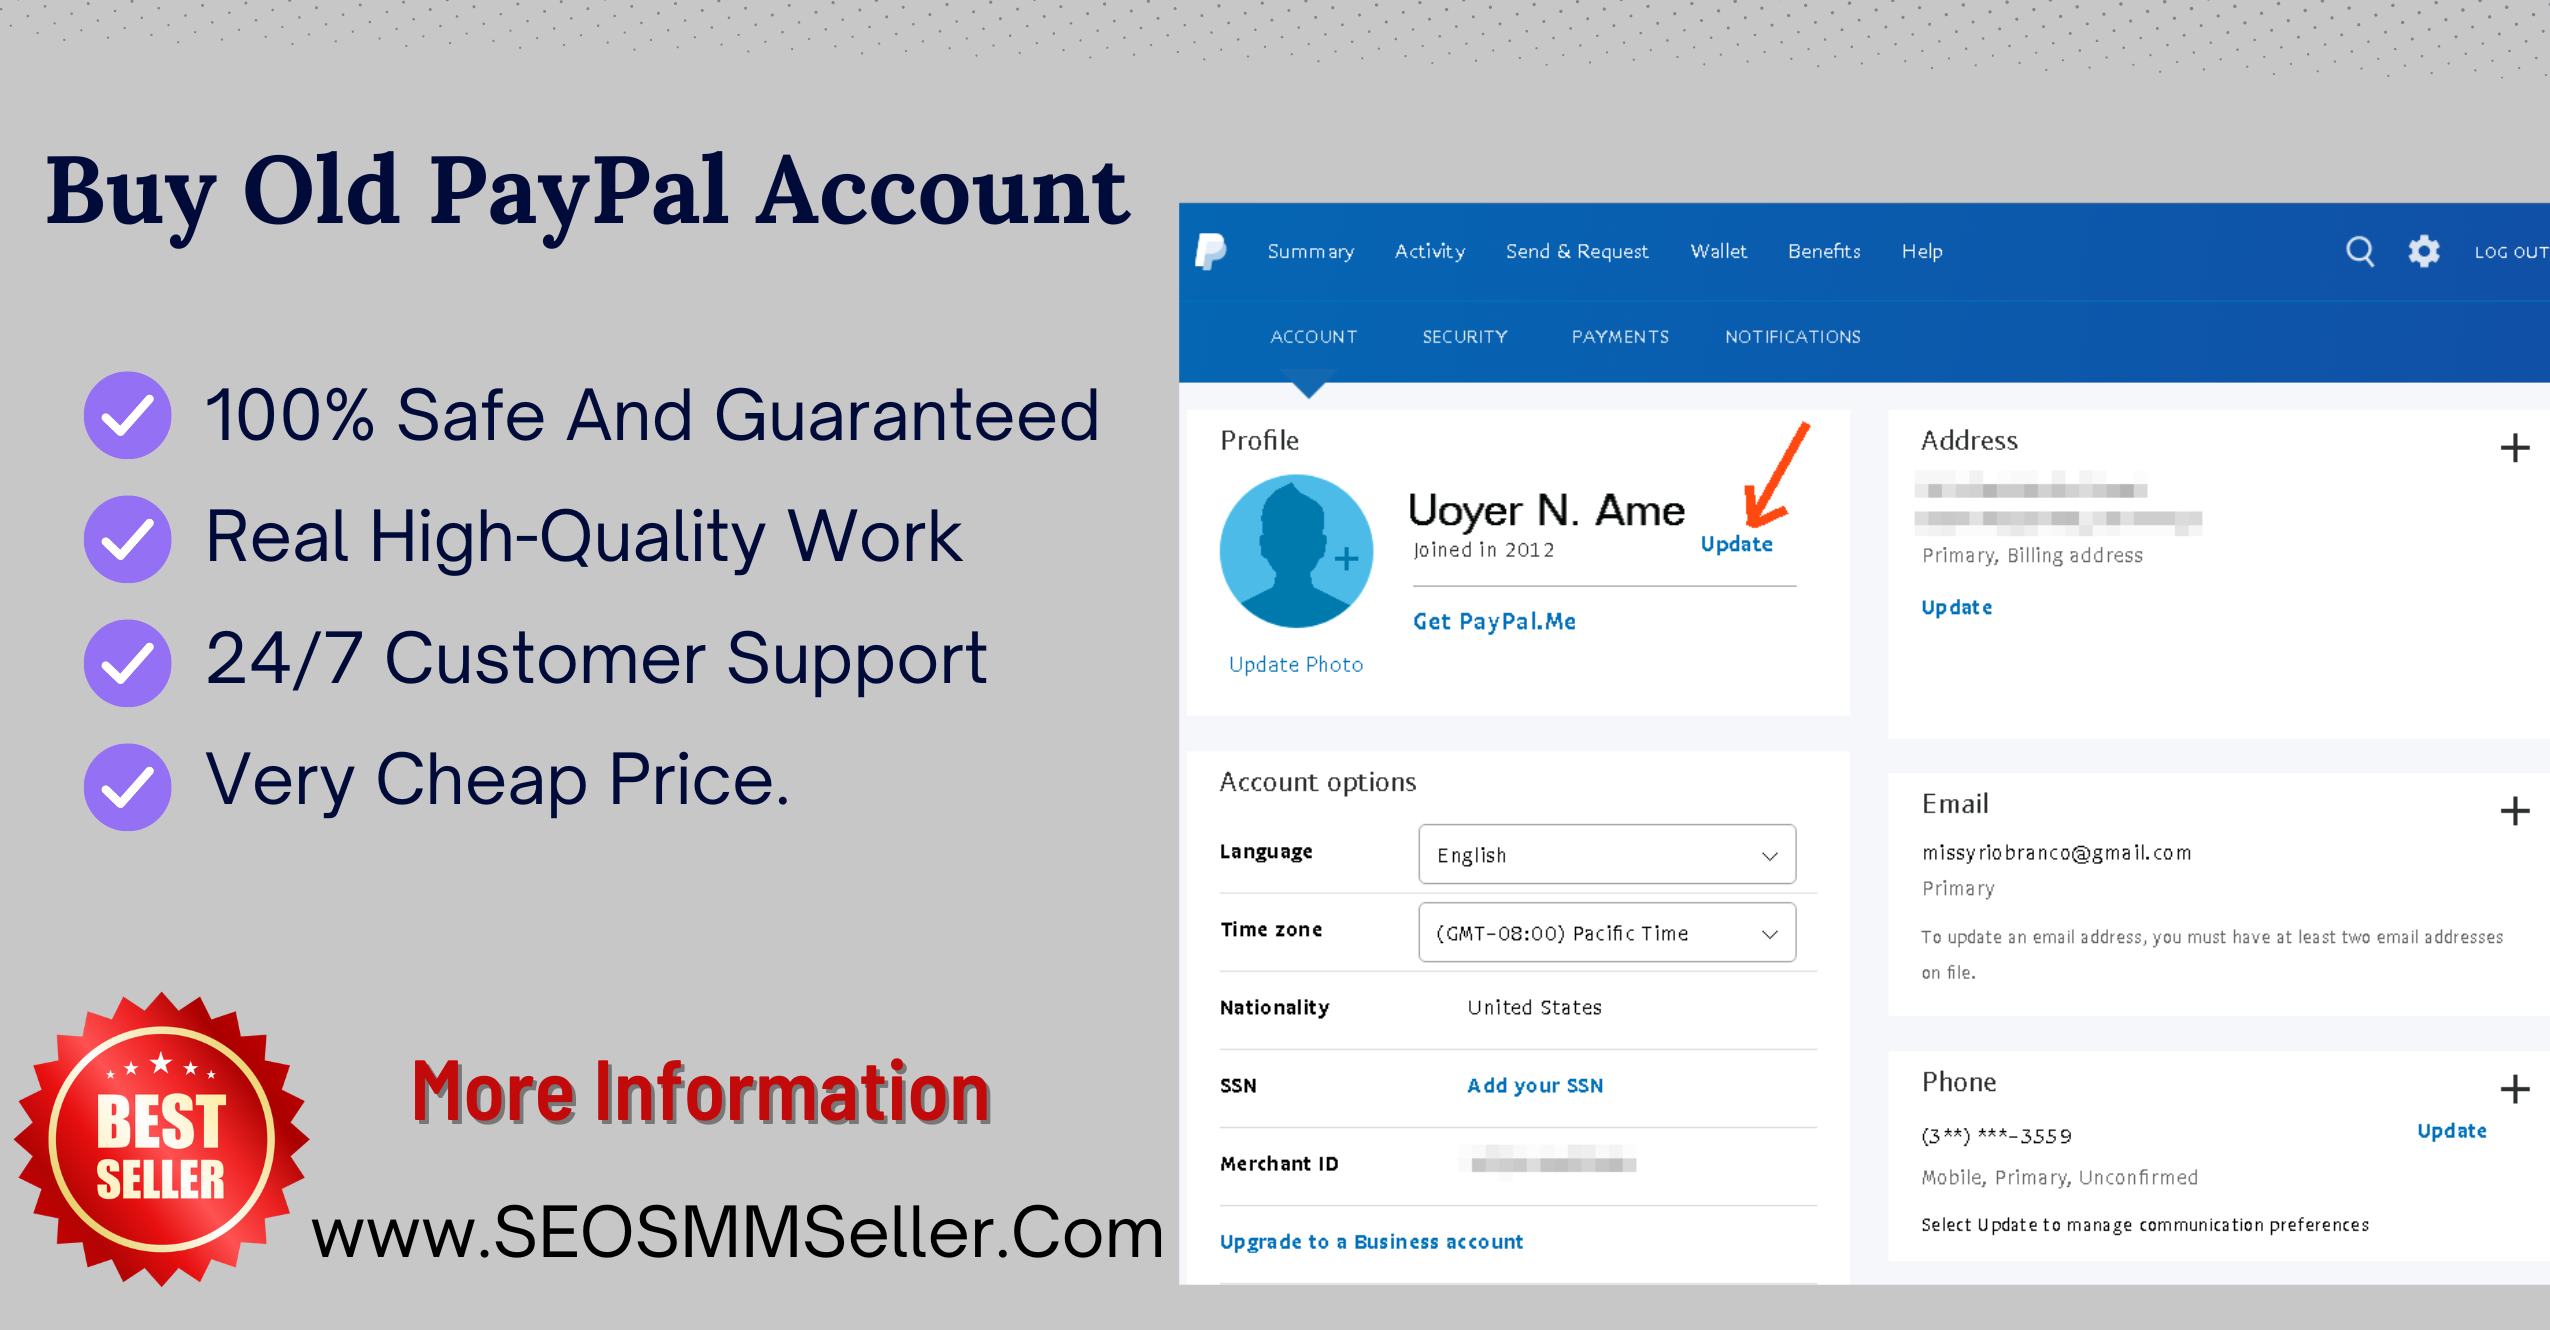 Buy Old PayPal Account